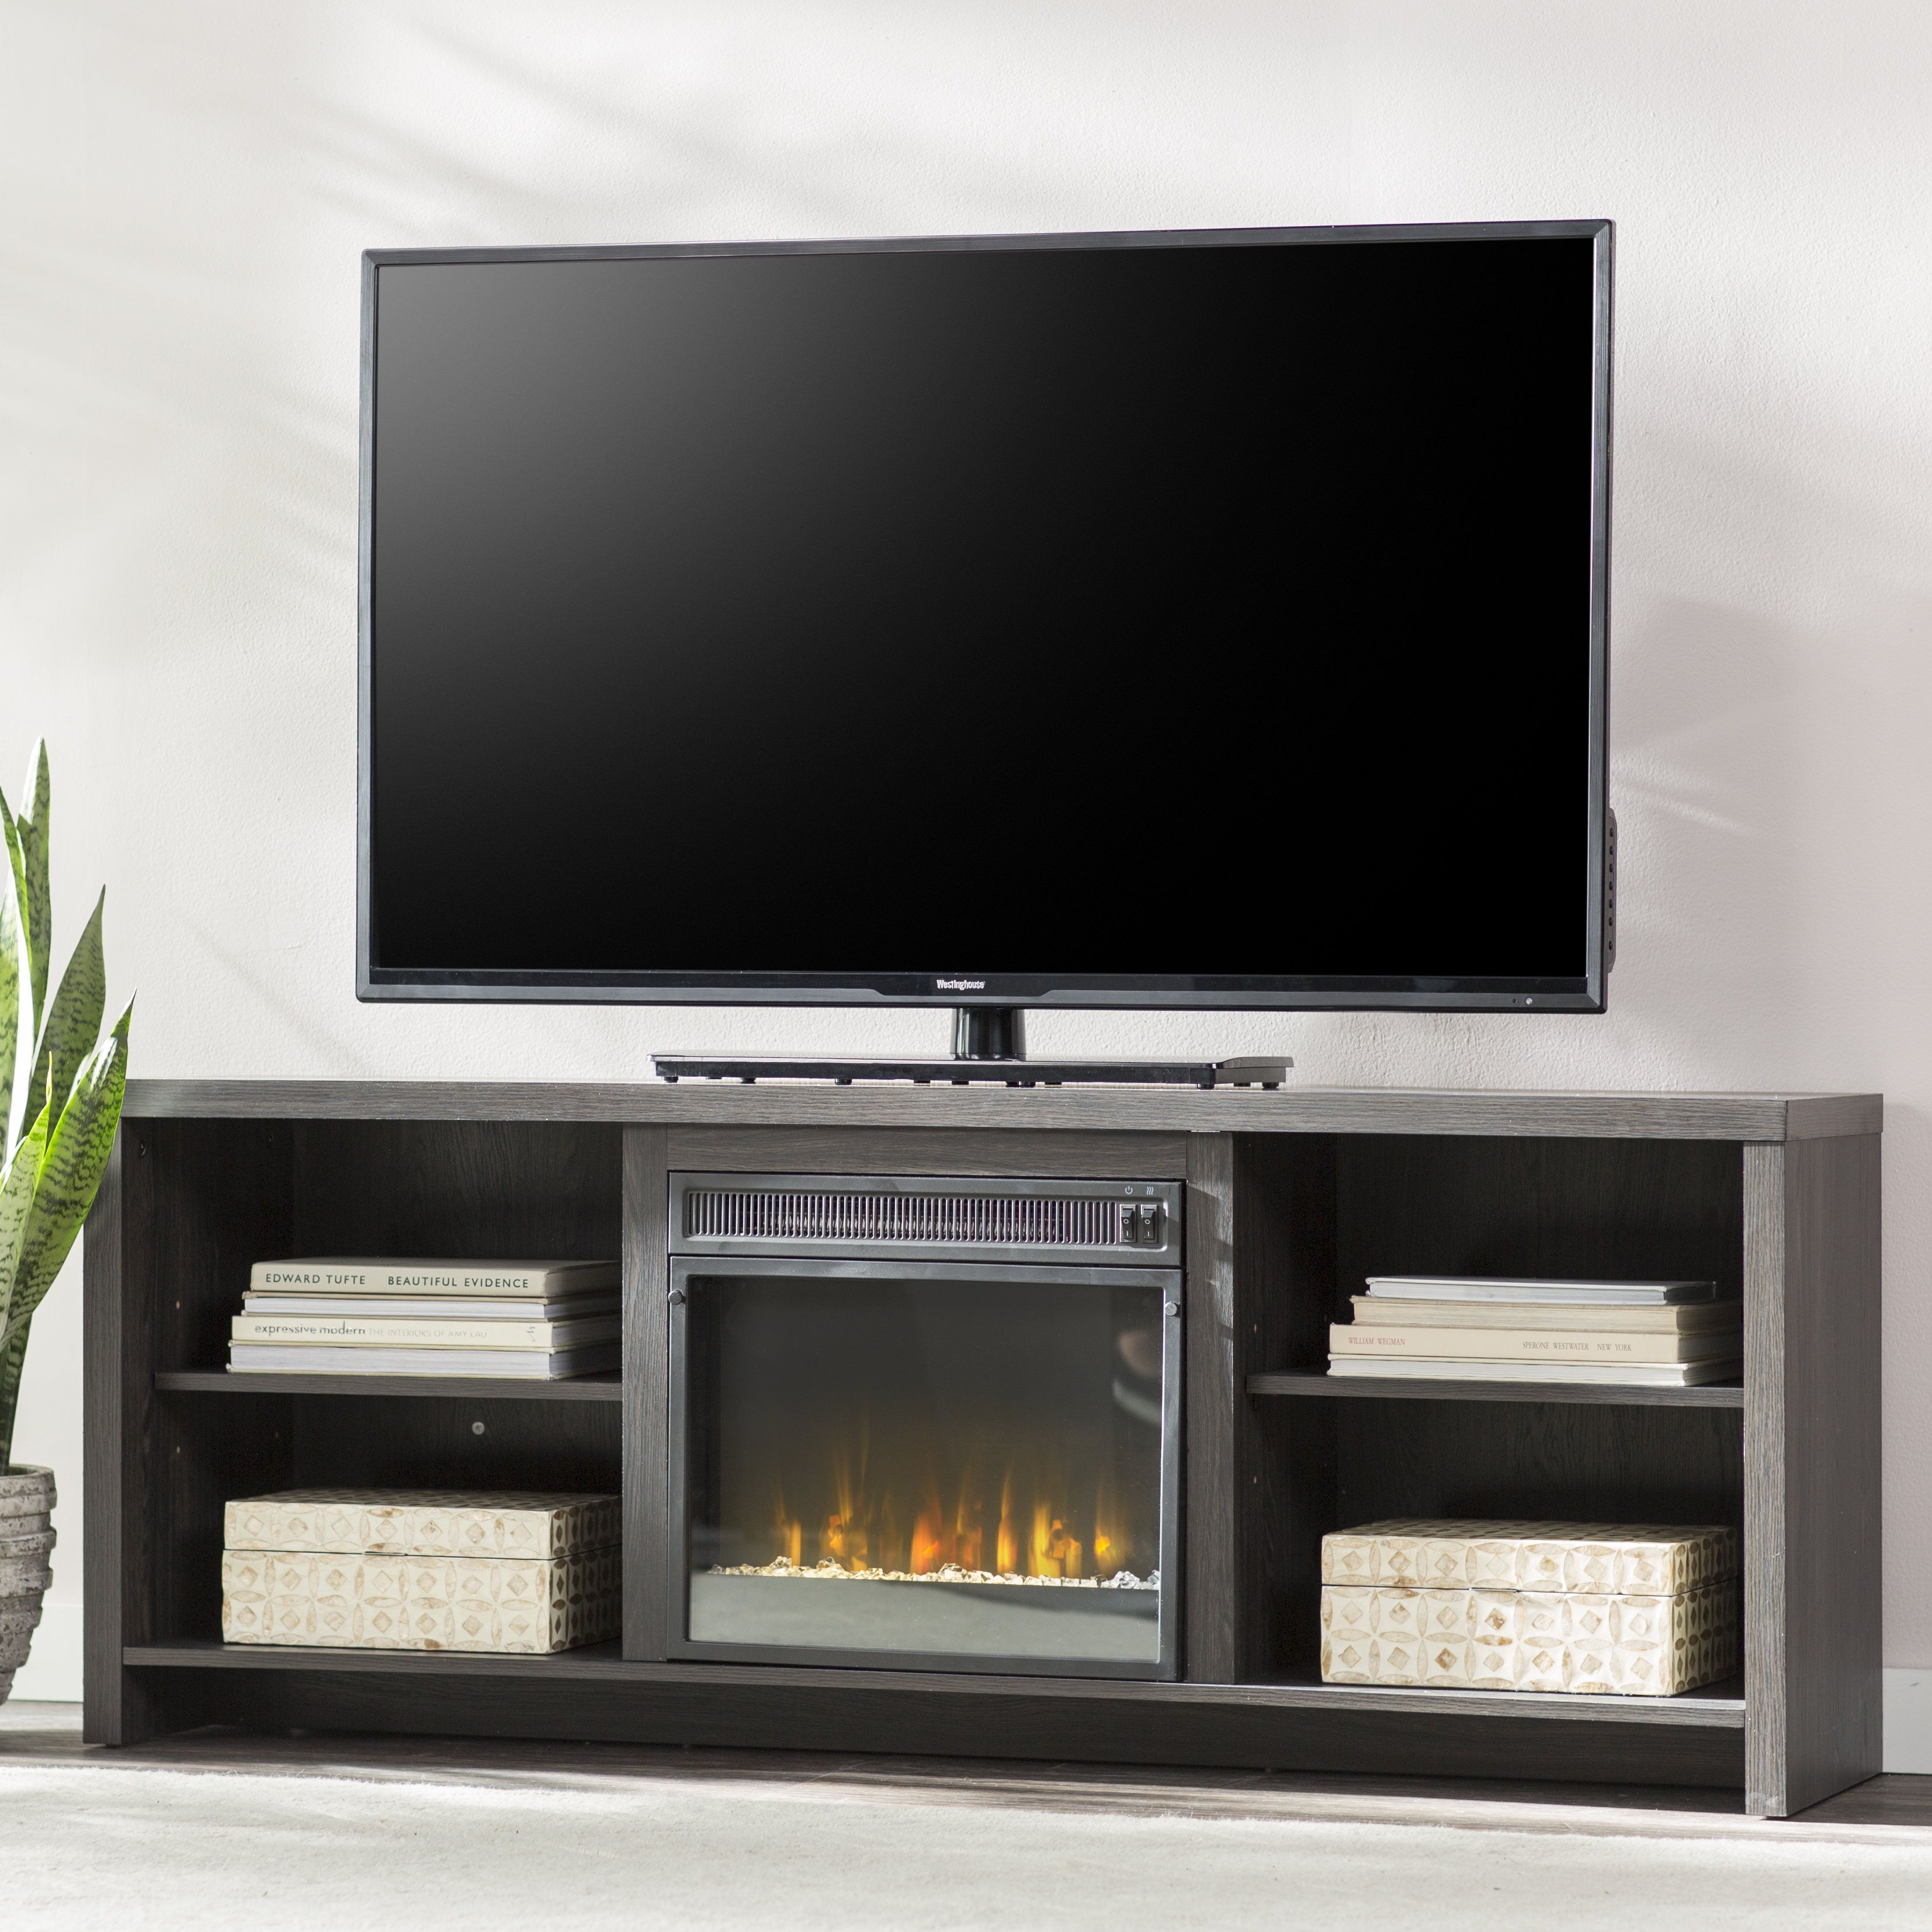 Fireplace Tv Stands & Entertainment Centers You'll Love | Wayfair (View 12 of 30)